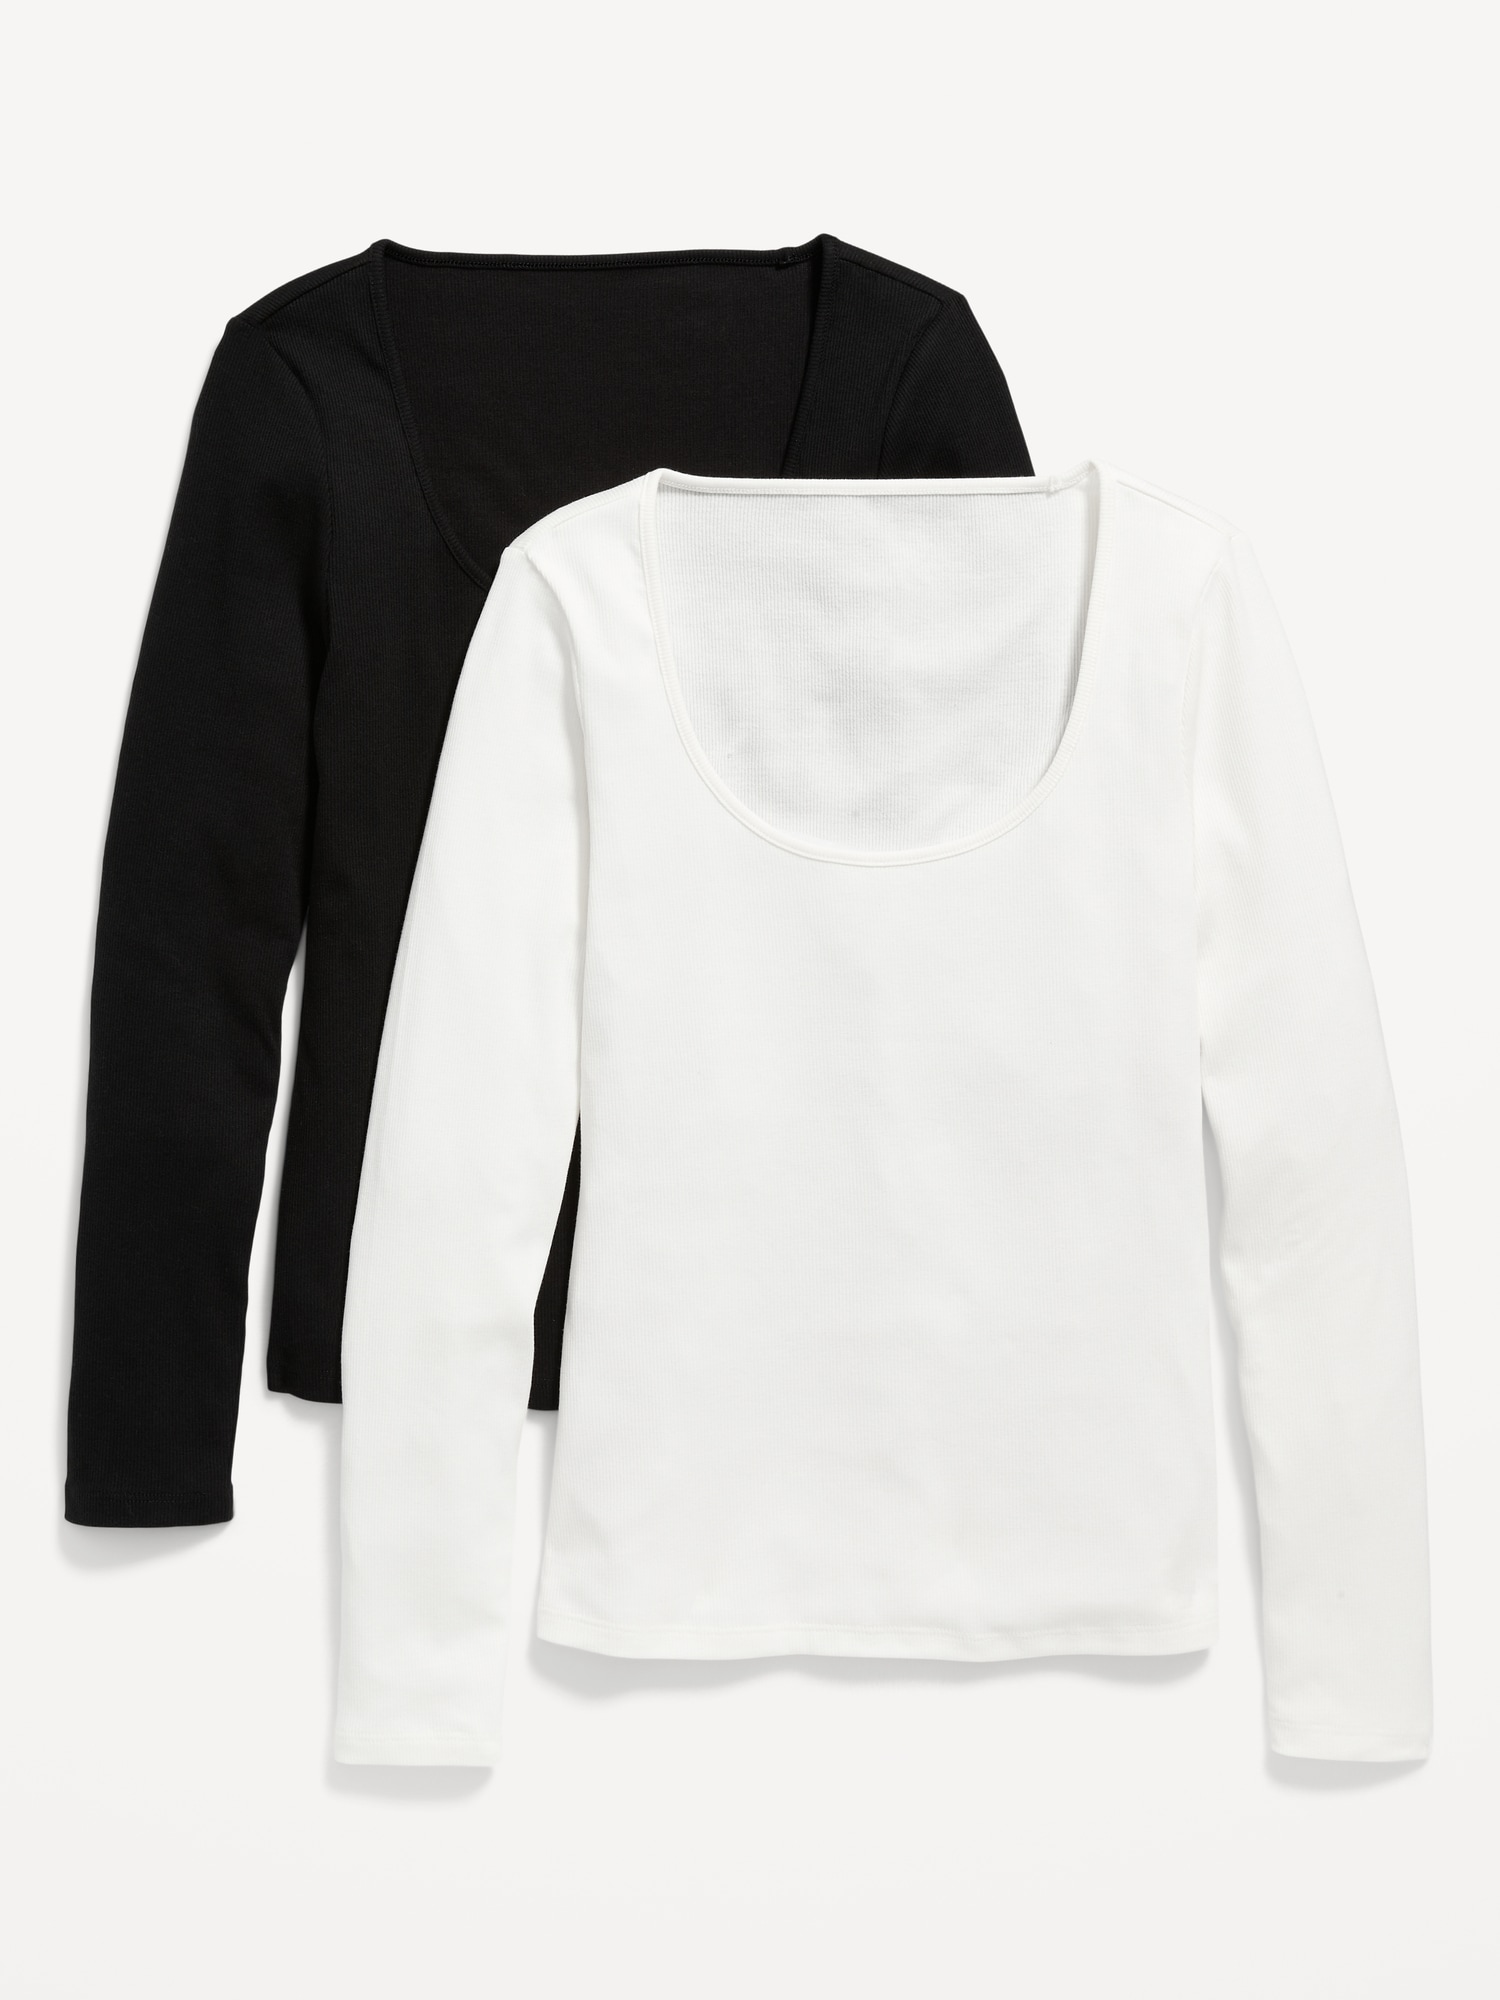 Long-Sleeve Slim-Fit Rib-Knit T-Shirt 2-Pack for Women | Old Navy